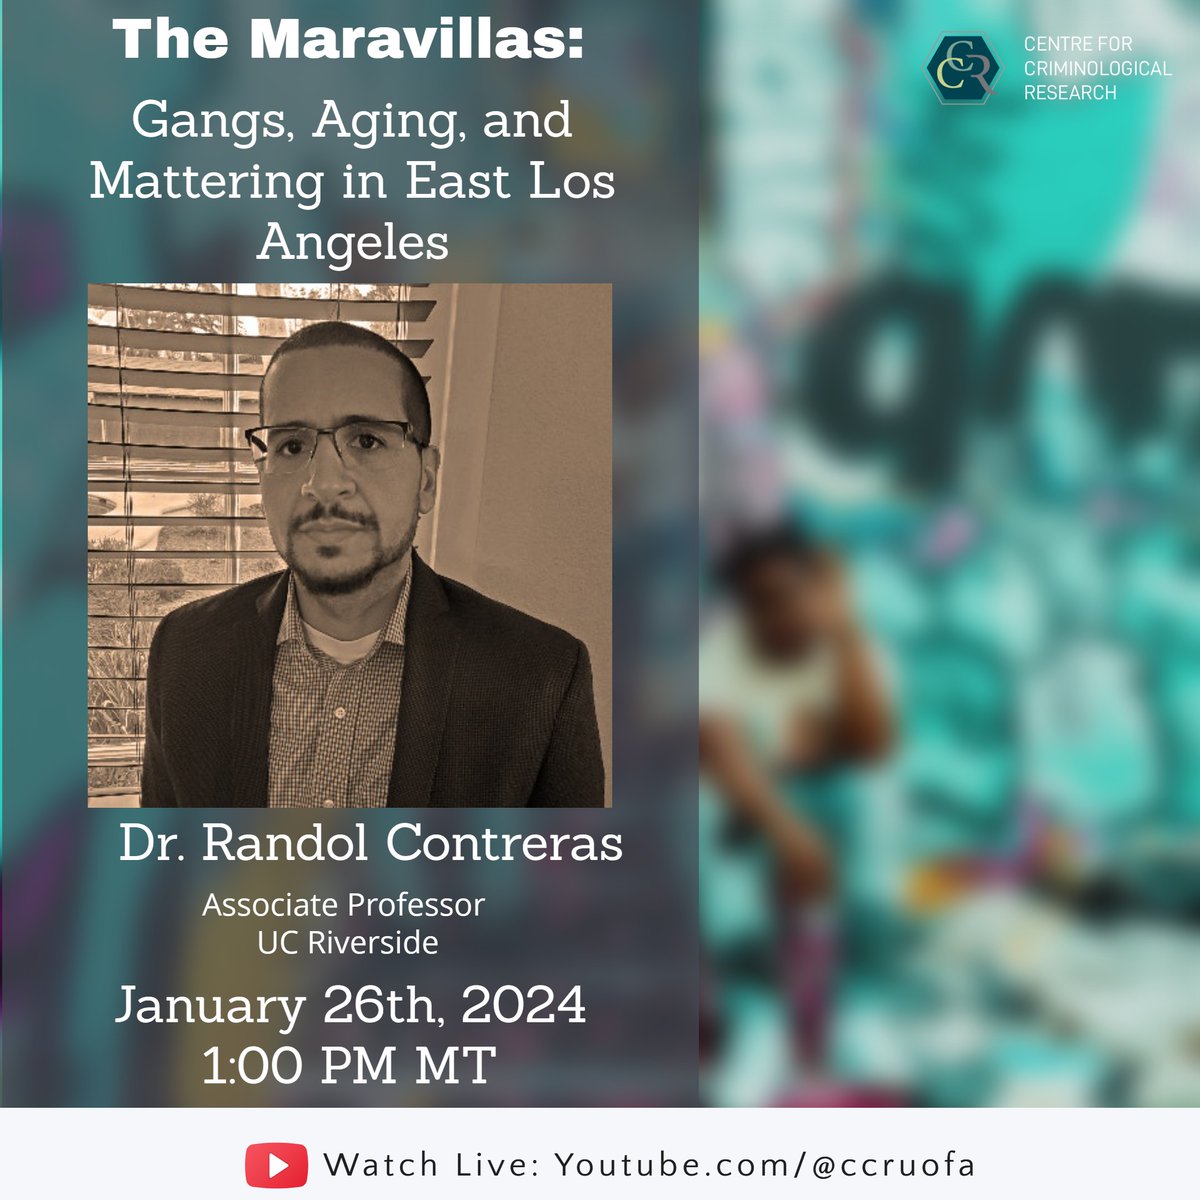 This coming Friday January 26 at 1:00 pm MT we will be hosting a talk by Dr. Randol Contreras. His talk is titled: The Maravillas: Gangs, Aging, and Mattering in East Los Angeles. Watch live on YT: youtube.com/live/3wVvlPJ4x…